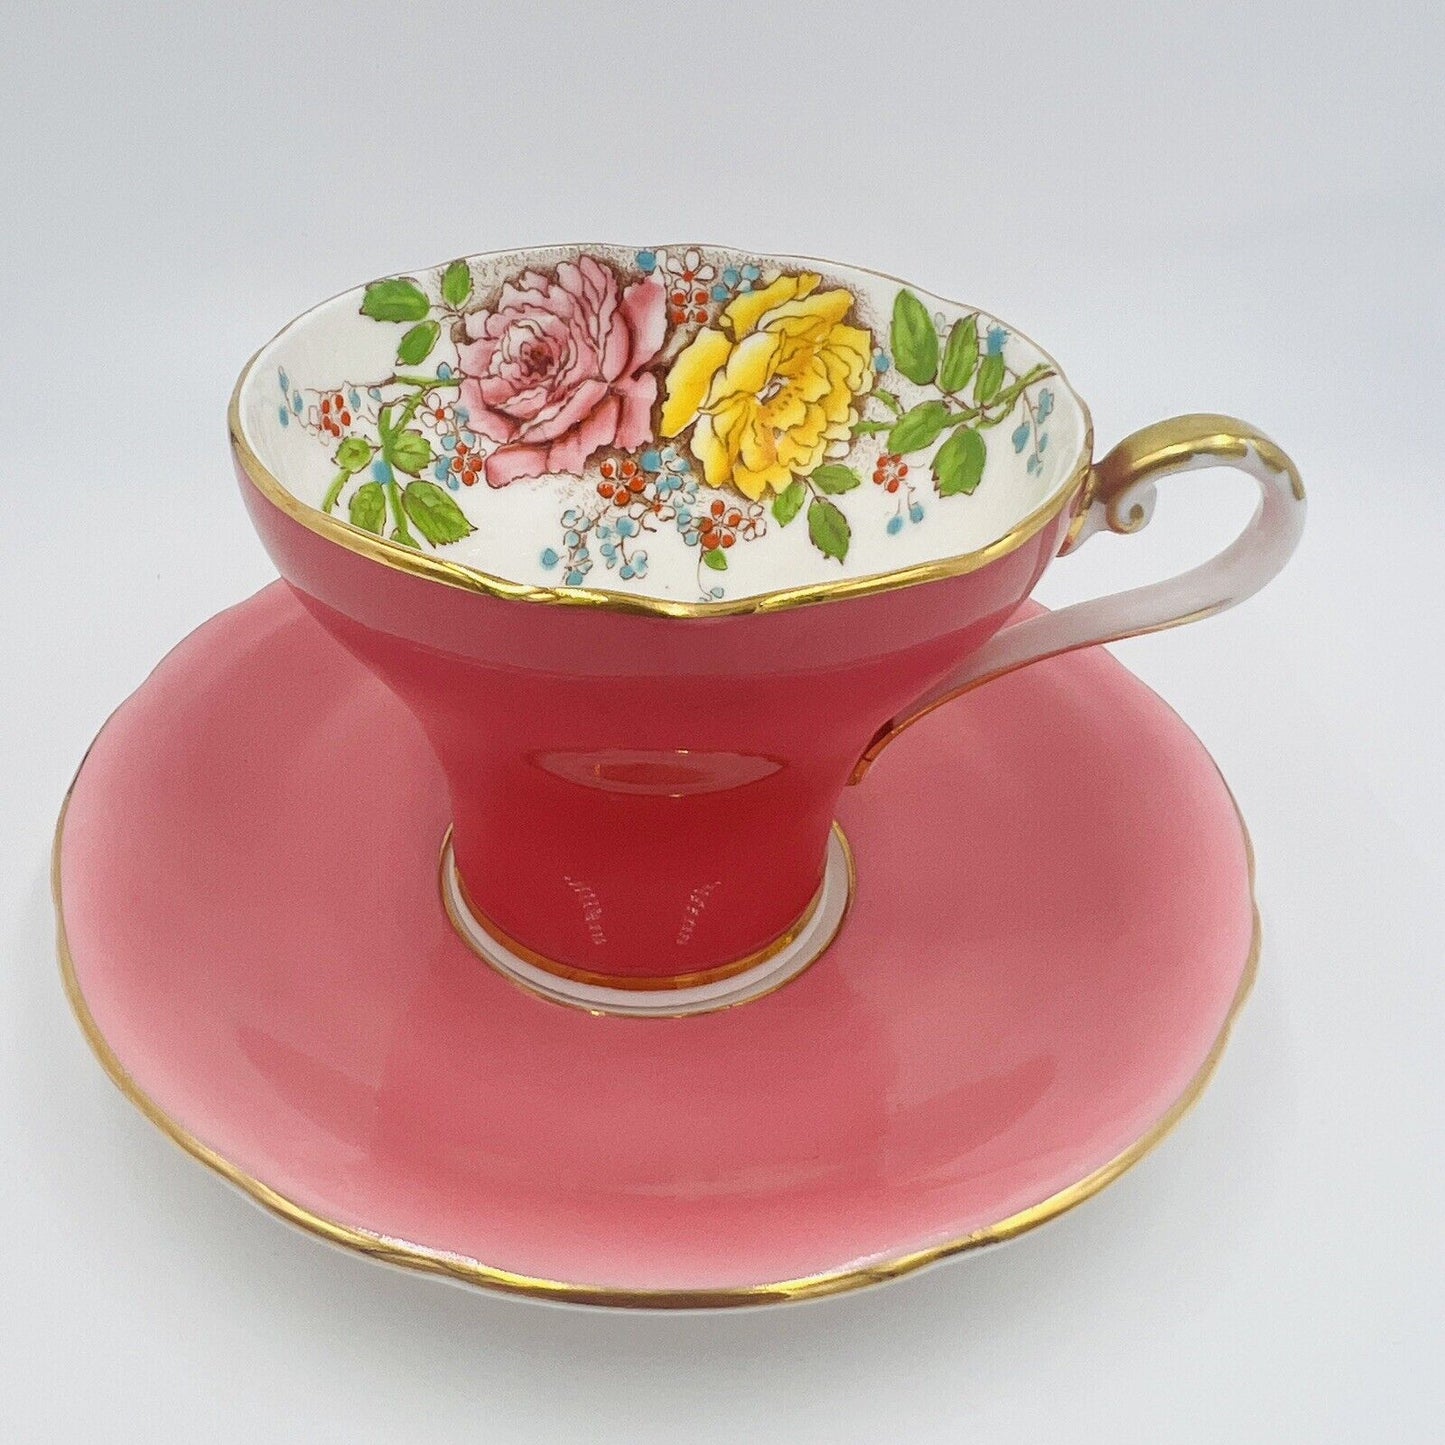 Aynsley Tea Cup & Saucer Cabbage Rose Pink Bone China Set T5025 Hand-painted